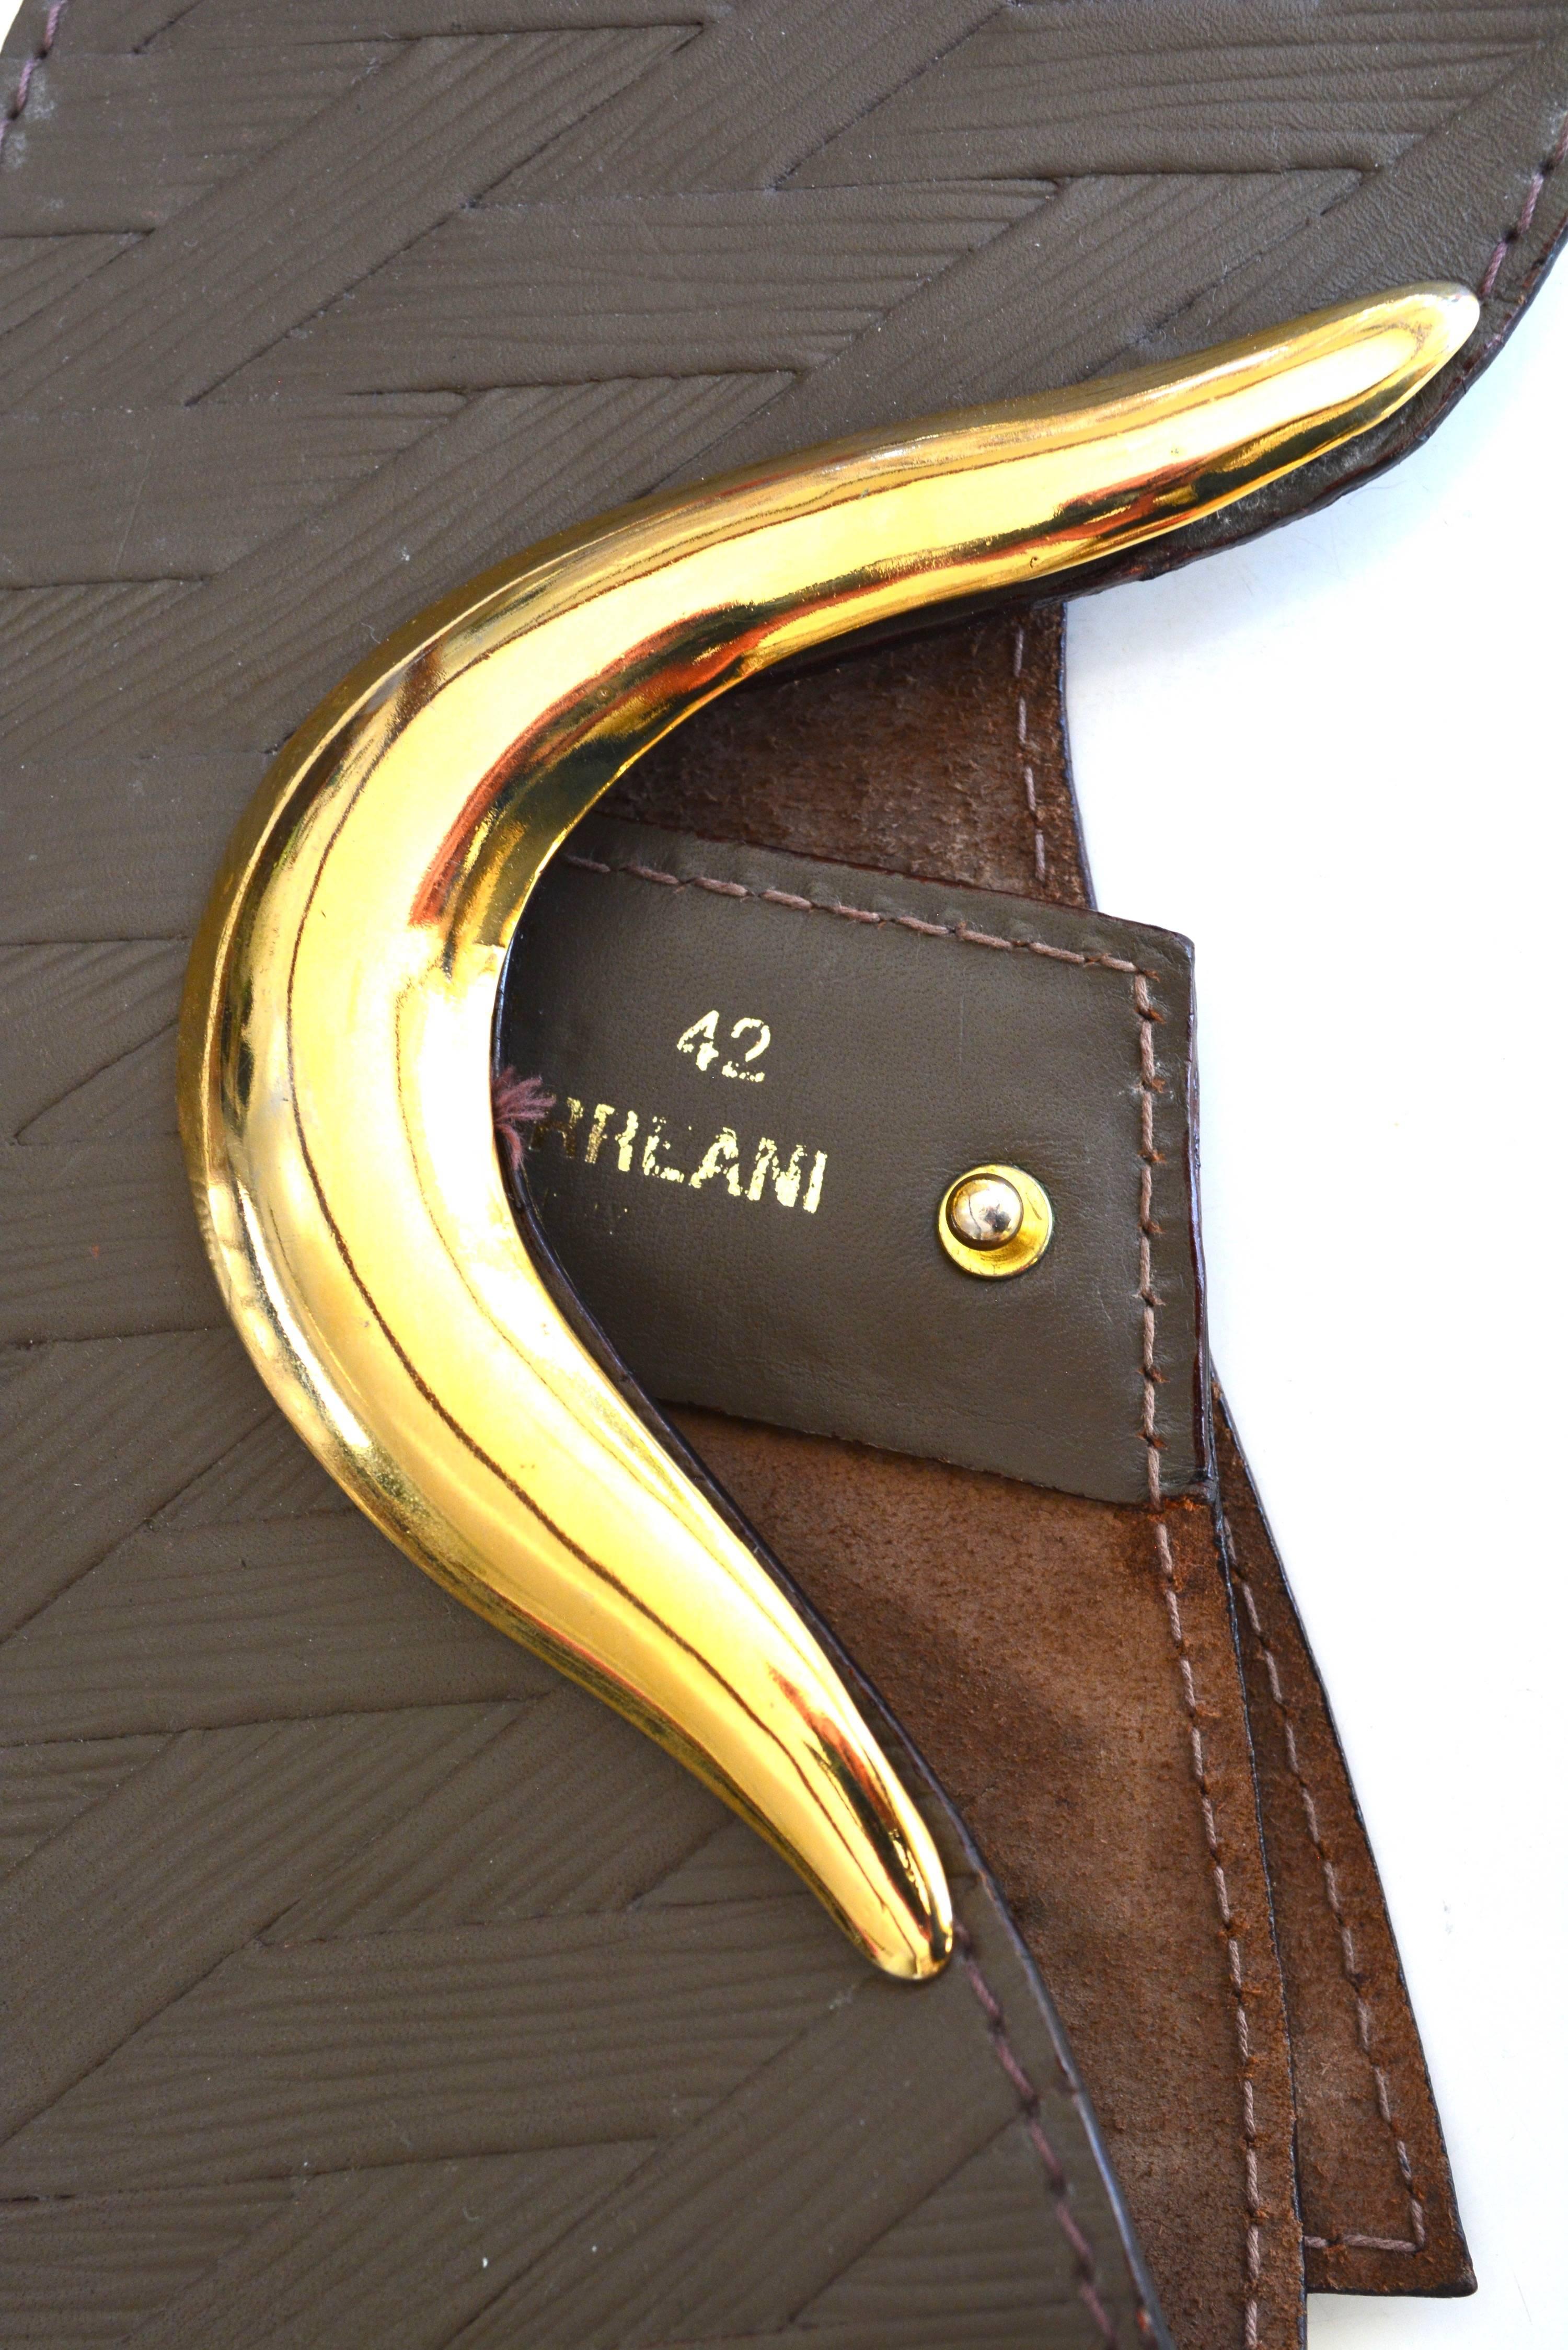 Circa late 70s-80s Ugo Correani signed made in Italy leather embossed belt. Marked a size 42. 32" long x 5" wide. It is adjustable.  Condition is very good with mild wear to the gold detail. 
